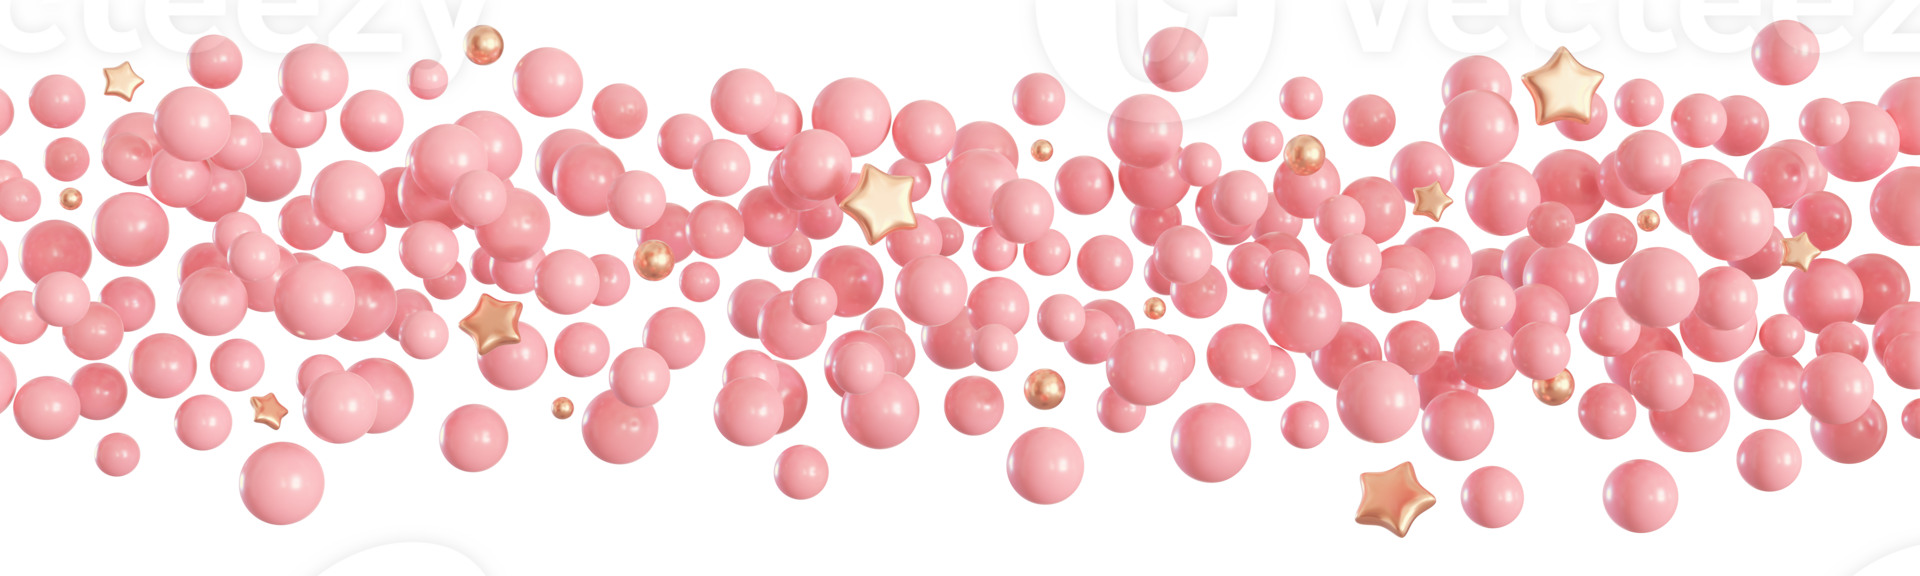 Pink balloons line on transparent background. It's a girl foreground. Border,  row. Cut out graphic design elements. Happy birthday, party, baby shower  decoration. Helium balloon group. 3D render. 30557569 PNG